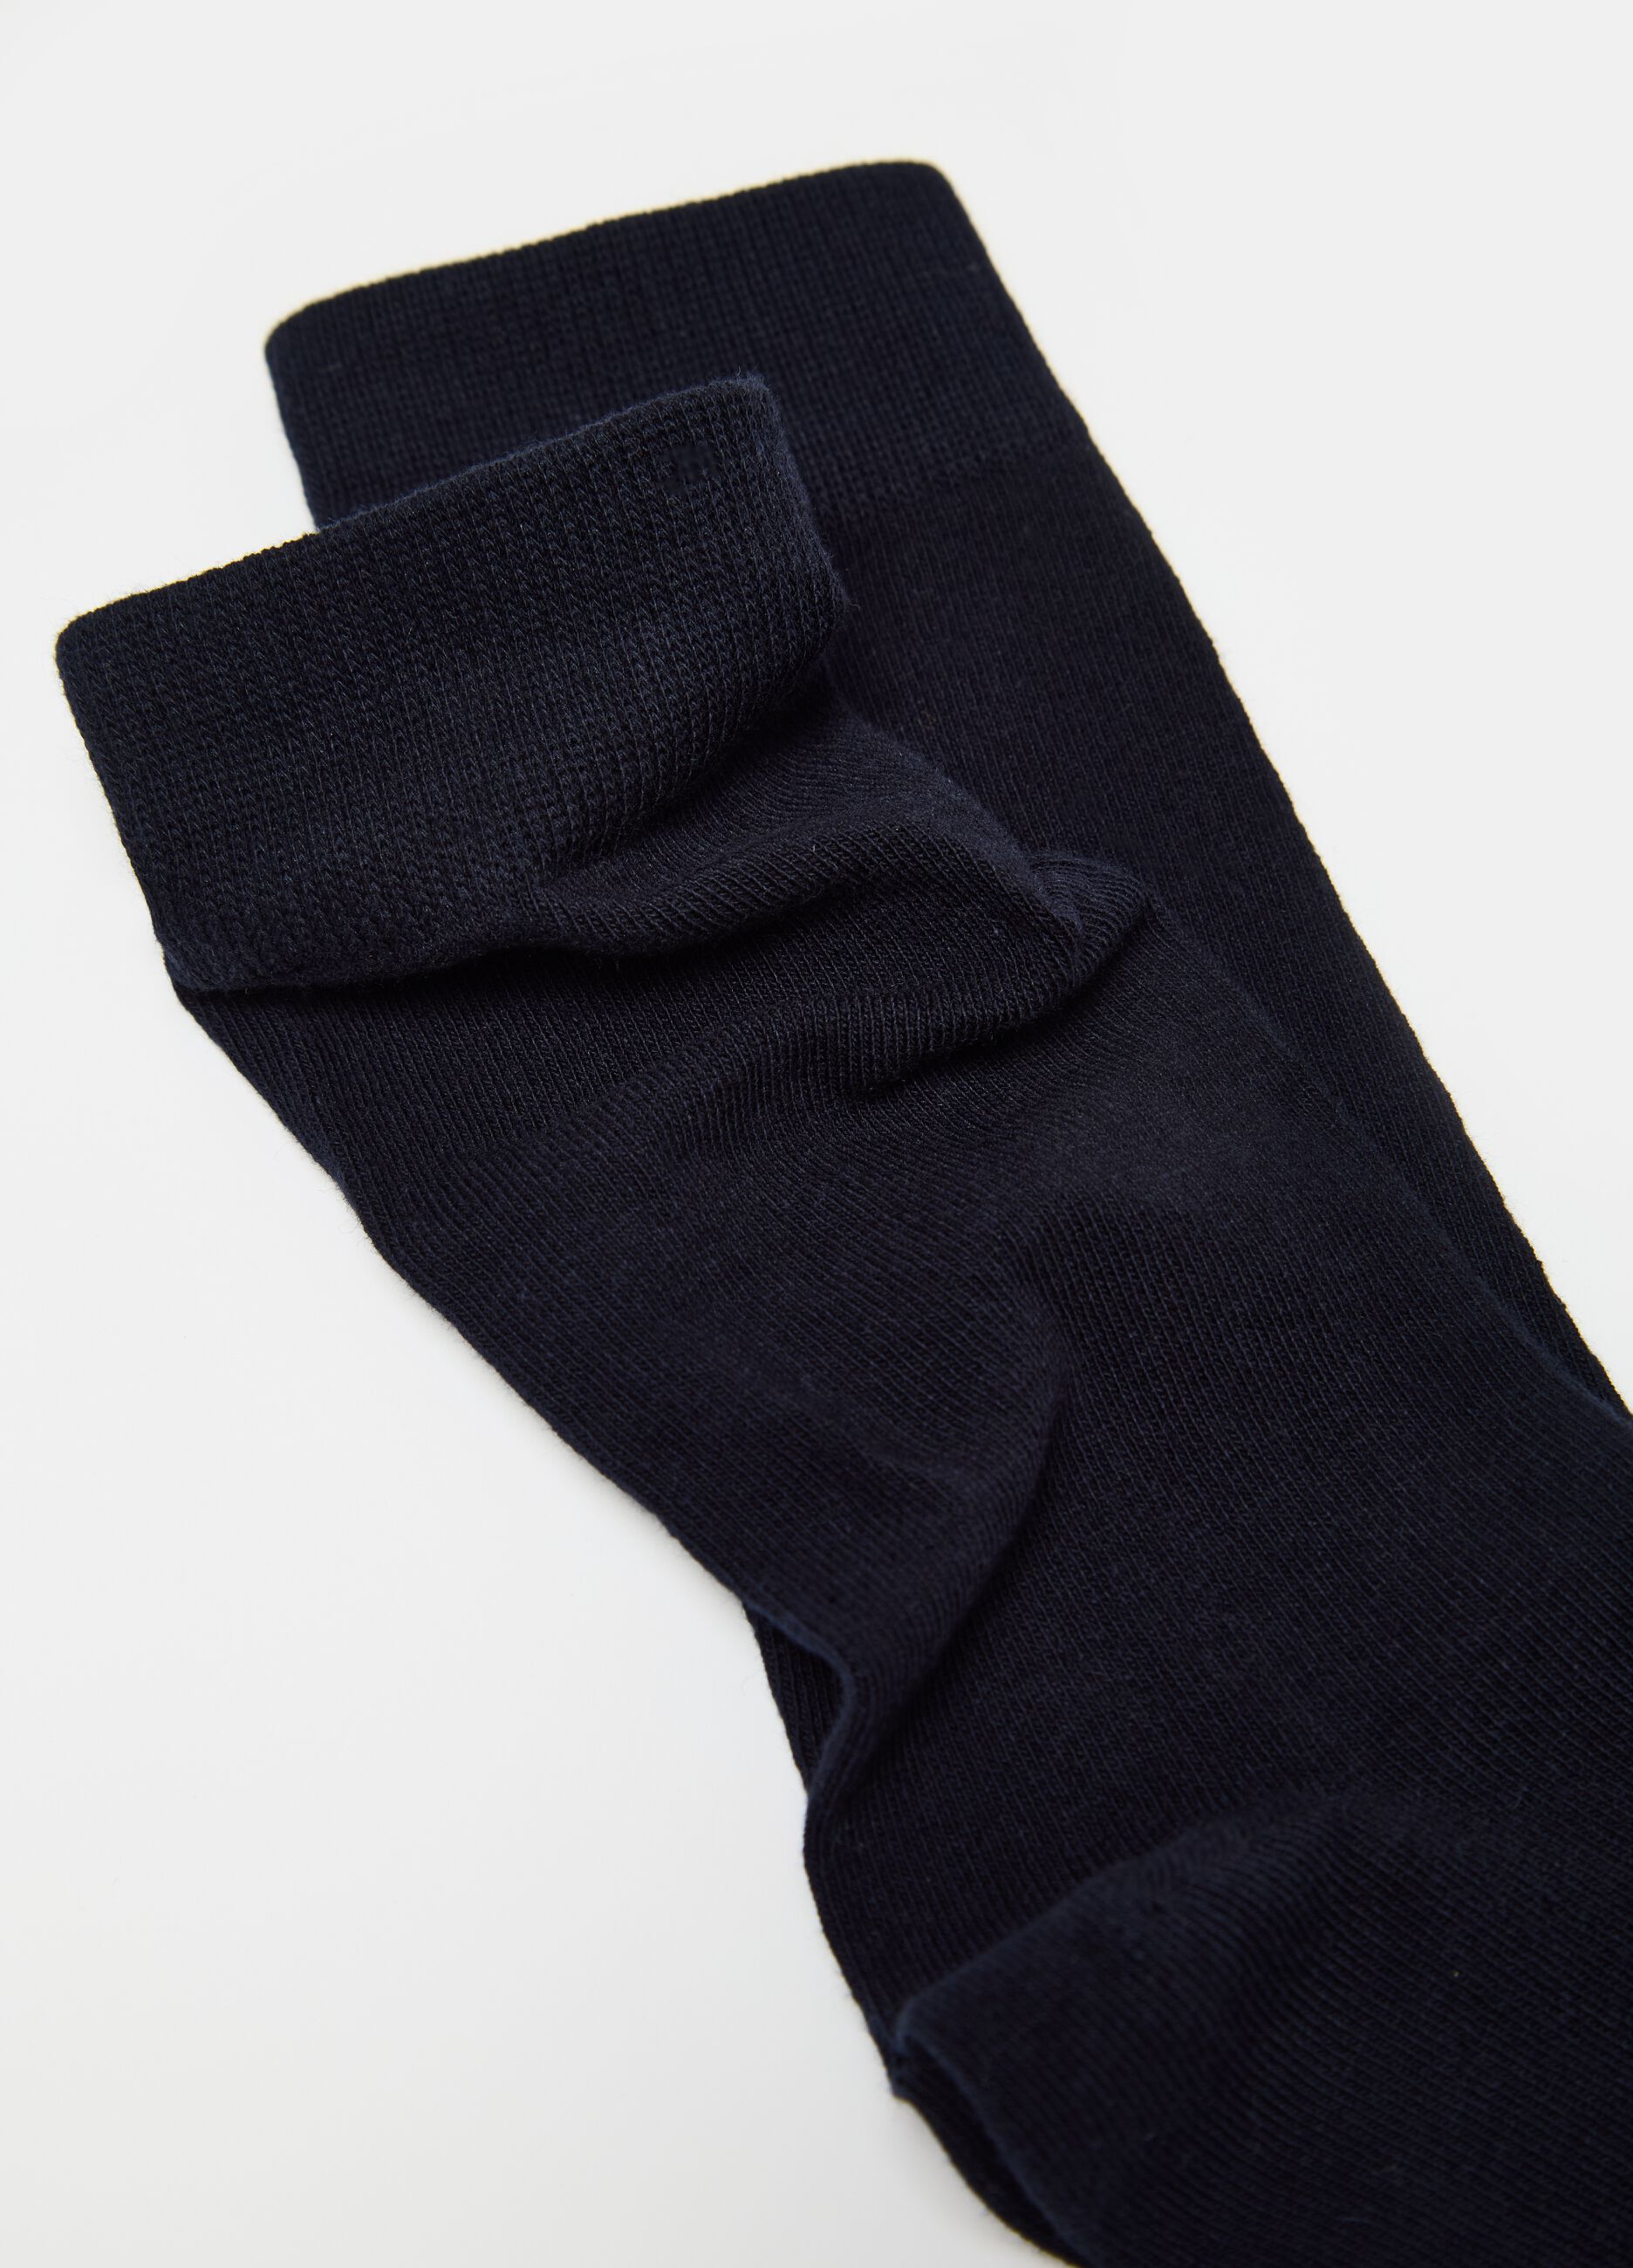 Two-pair pack of mid-length stretch socks